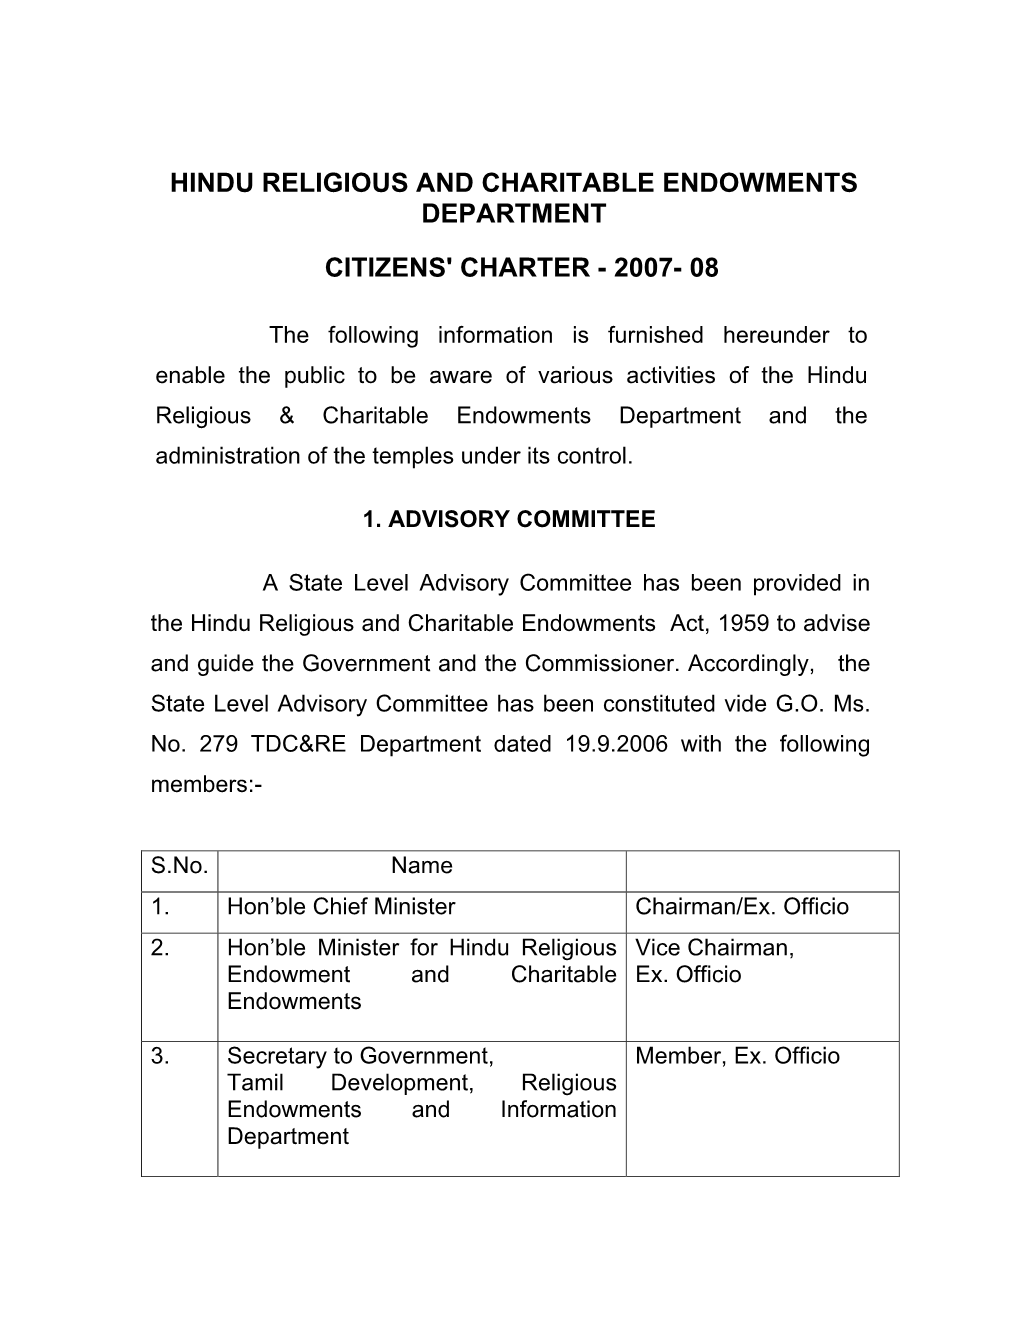 Hindu Religious and Charitable Endowments Department